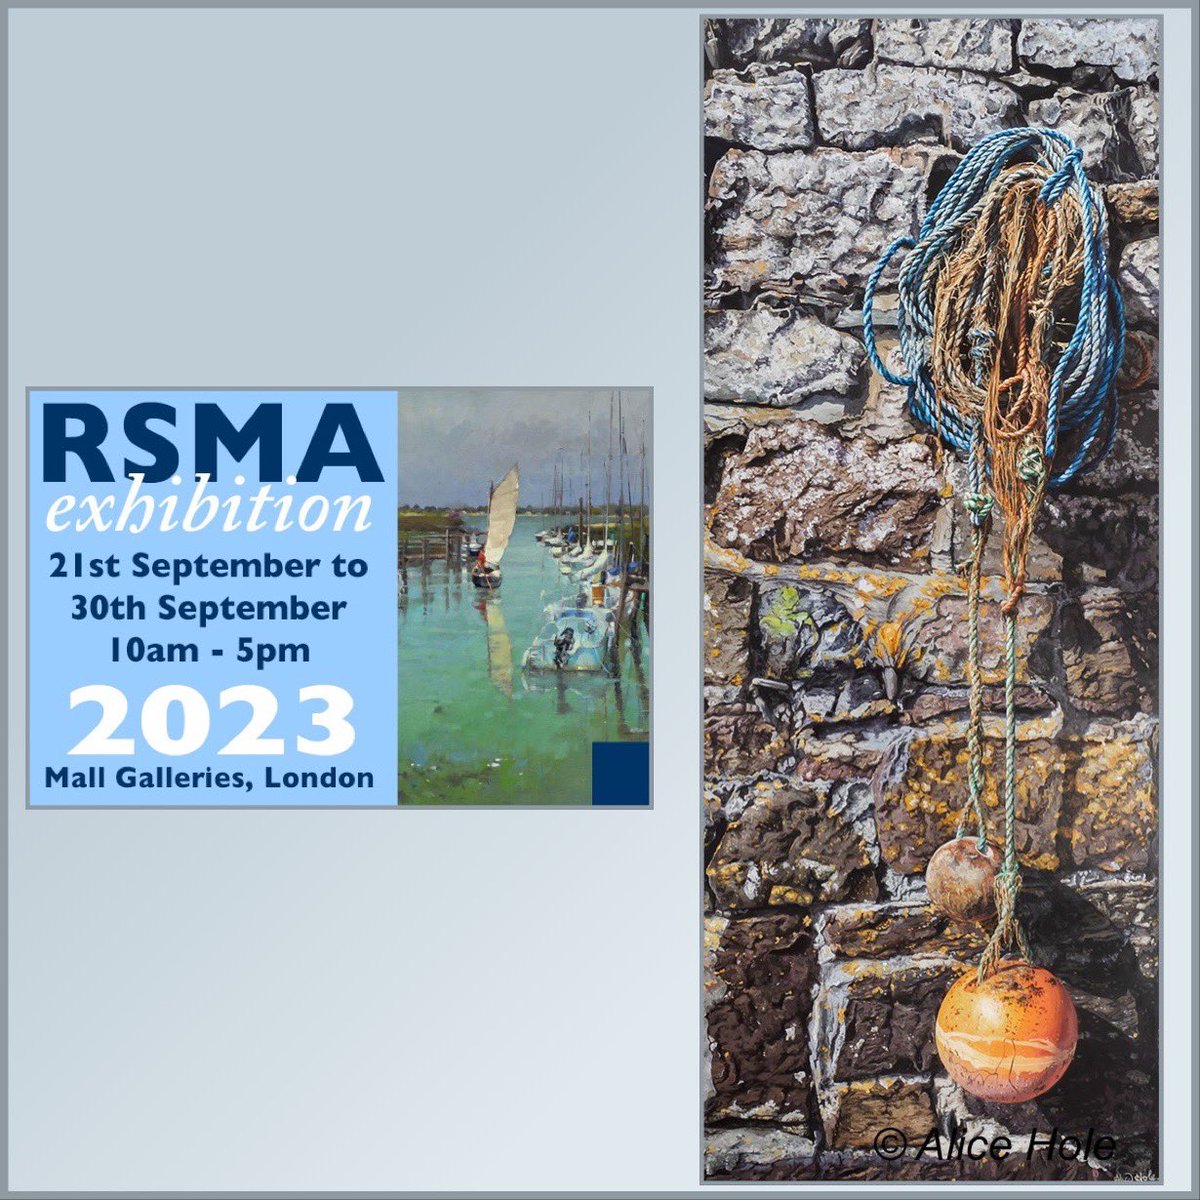 Beyond thrilled that ‘Against the Wall, Cadgwith’ has been accepted into the Royal Society of Marine Art Exhibition in September in the @mallgalleries ☺️🎉 #rsma #roayalsocietyofmarineart #alicehole #aliceholeartist #cornwall #cornwallart #painting